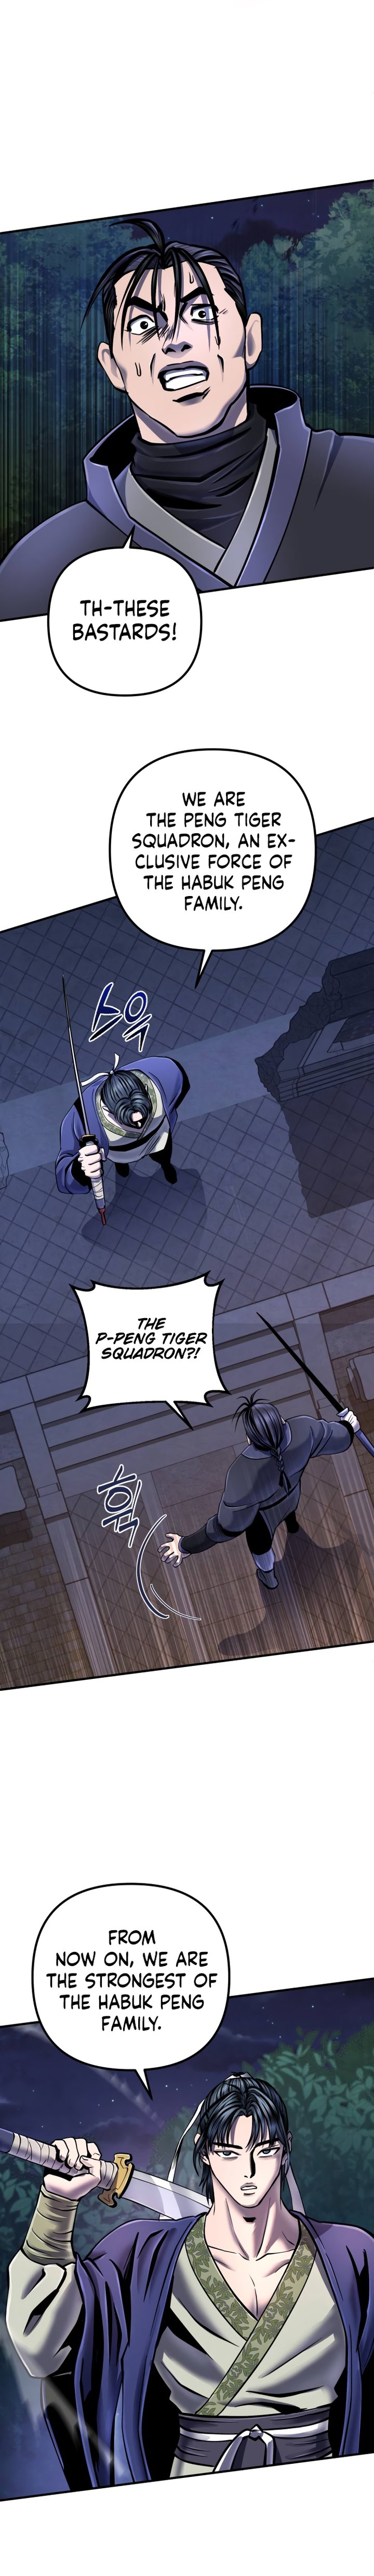 Revenge Of Young Master Peng Chapter 49 Page 2